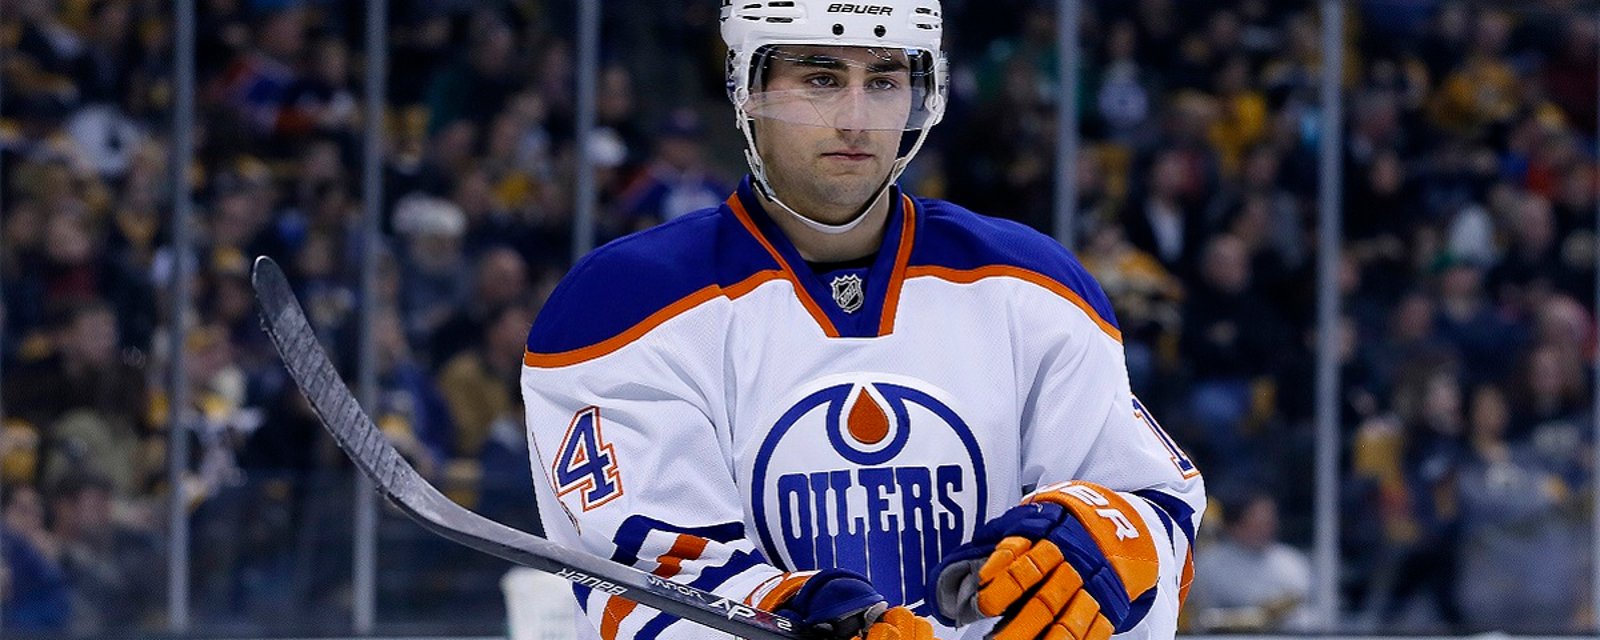 Seven teams in the mix for Eberle, two teams believed to be “front-runners.”